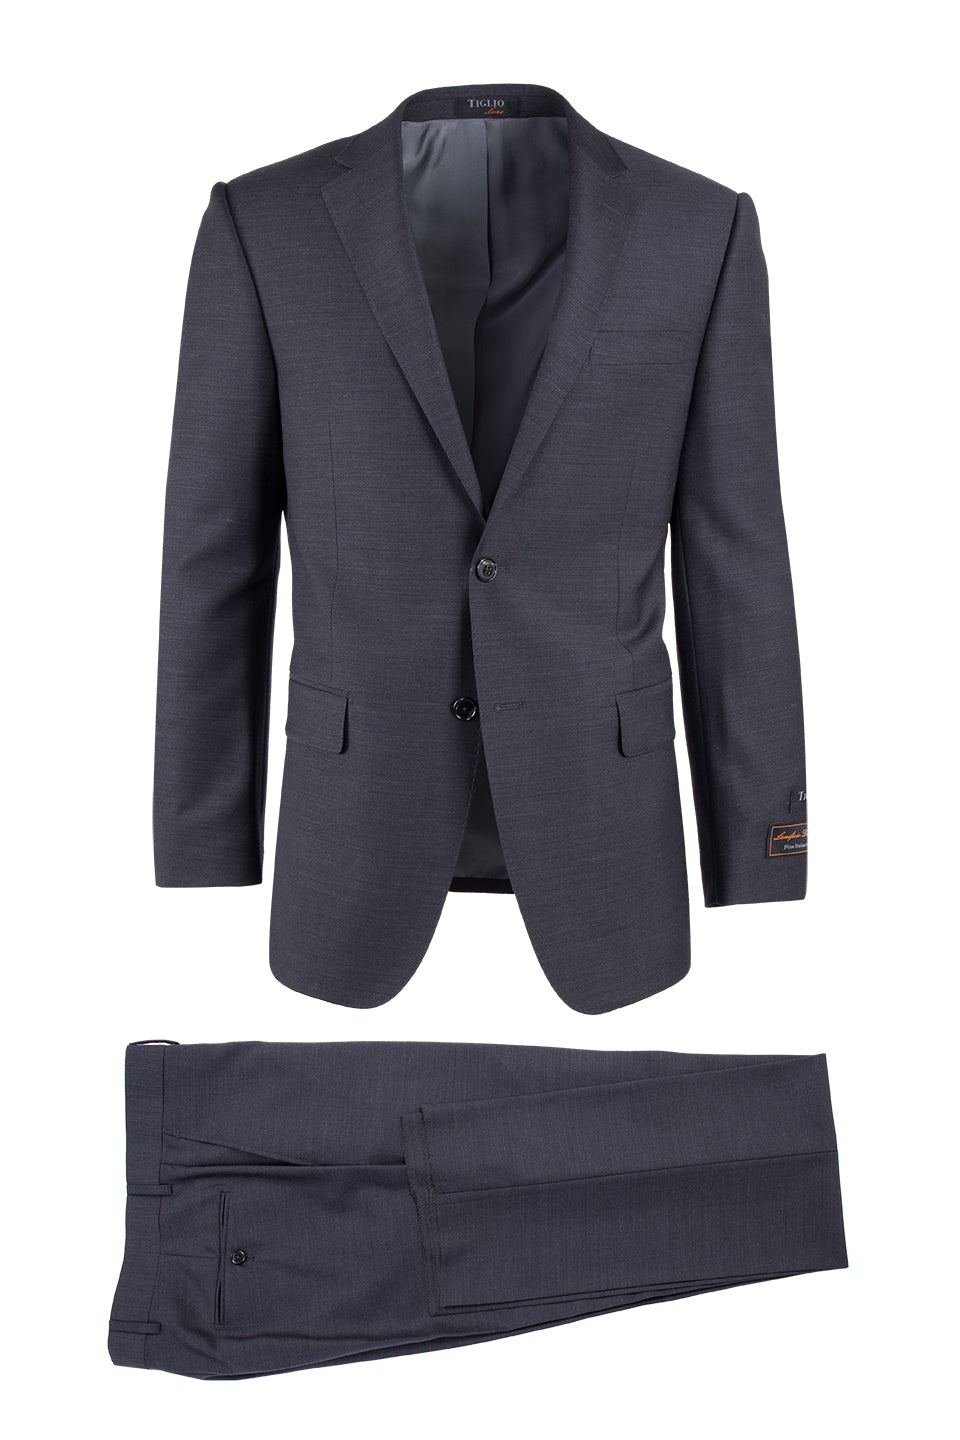 Novello Charcoal Gray, Modern Fit, Pure Wool Suit by Tiglio Luxe TIG10 ...